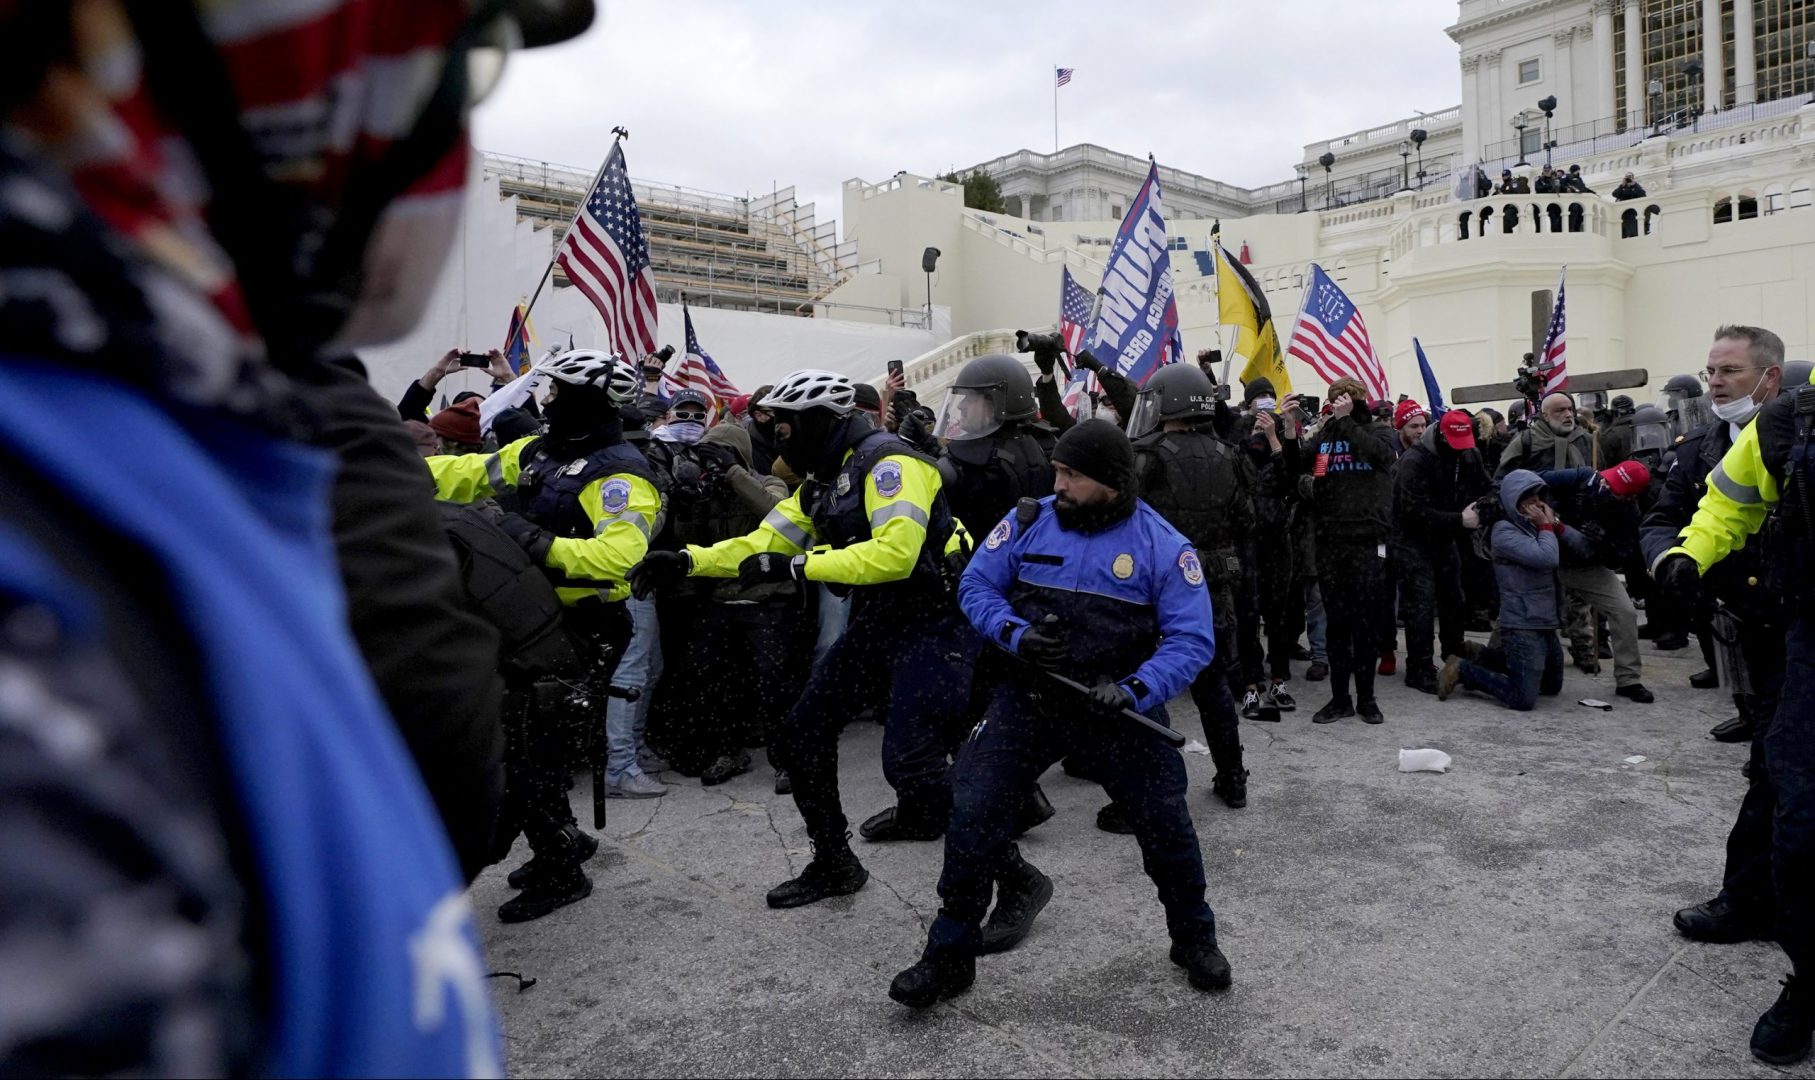 Police officers try to push back President Donald Trump supporters trying to break through a police barrier, Wednesday, Jan. 6, 2021, at the Capitol in Washington. The incident happened as Congress prepared to affirm President-elect Joe Biden's victory, with thousands of people gathered to show their support for President Donald Trump and his claims of election fraud. 